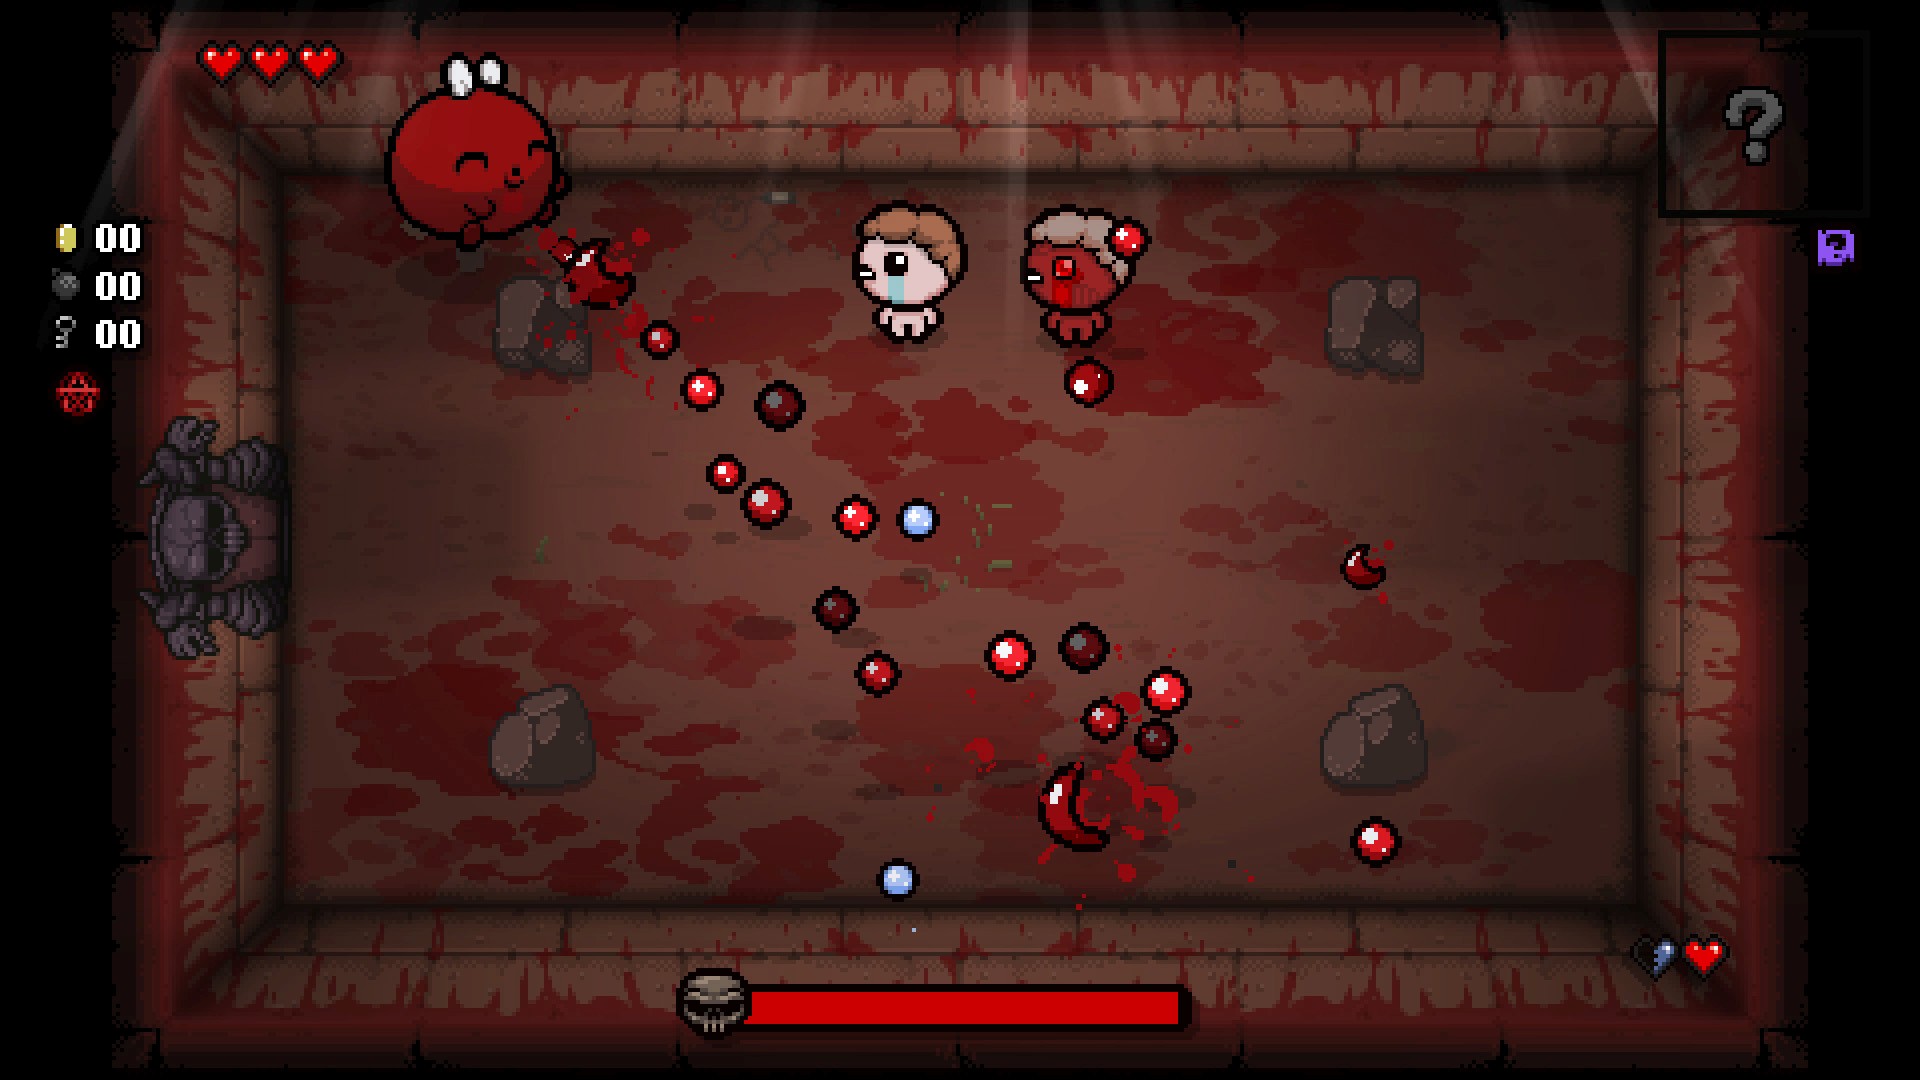 Screenshot from The Binding of Isaac: Repentance